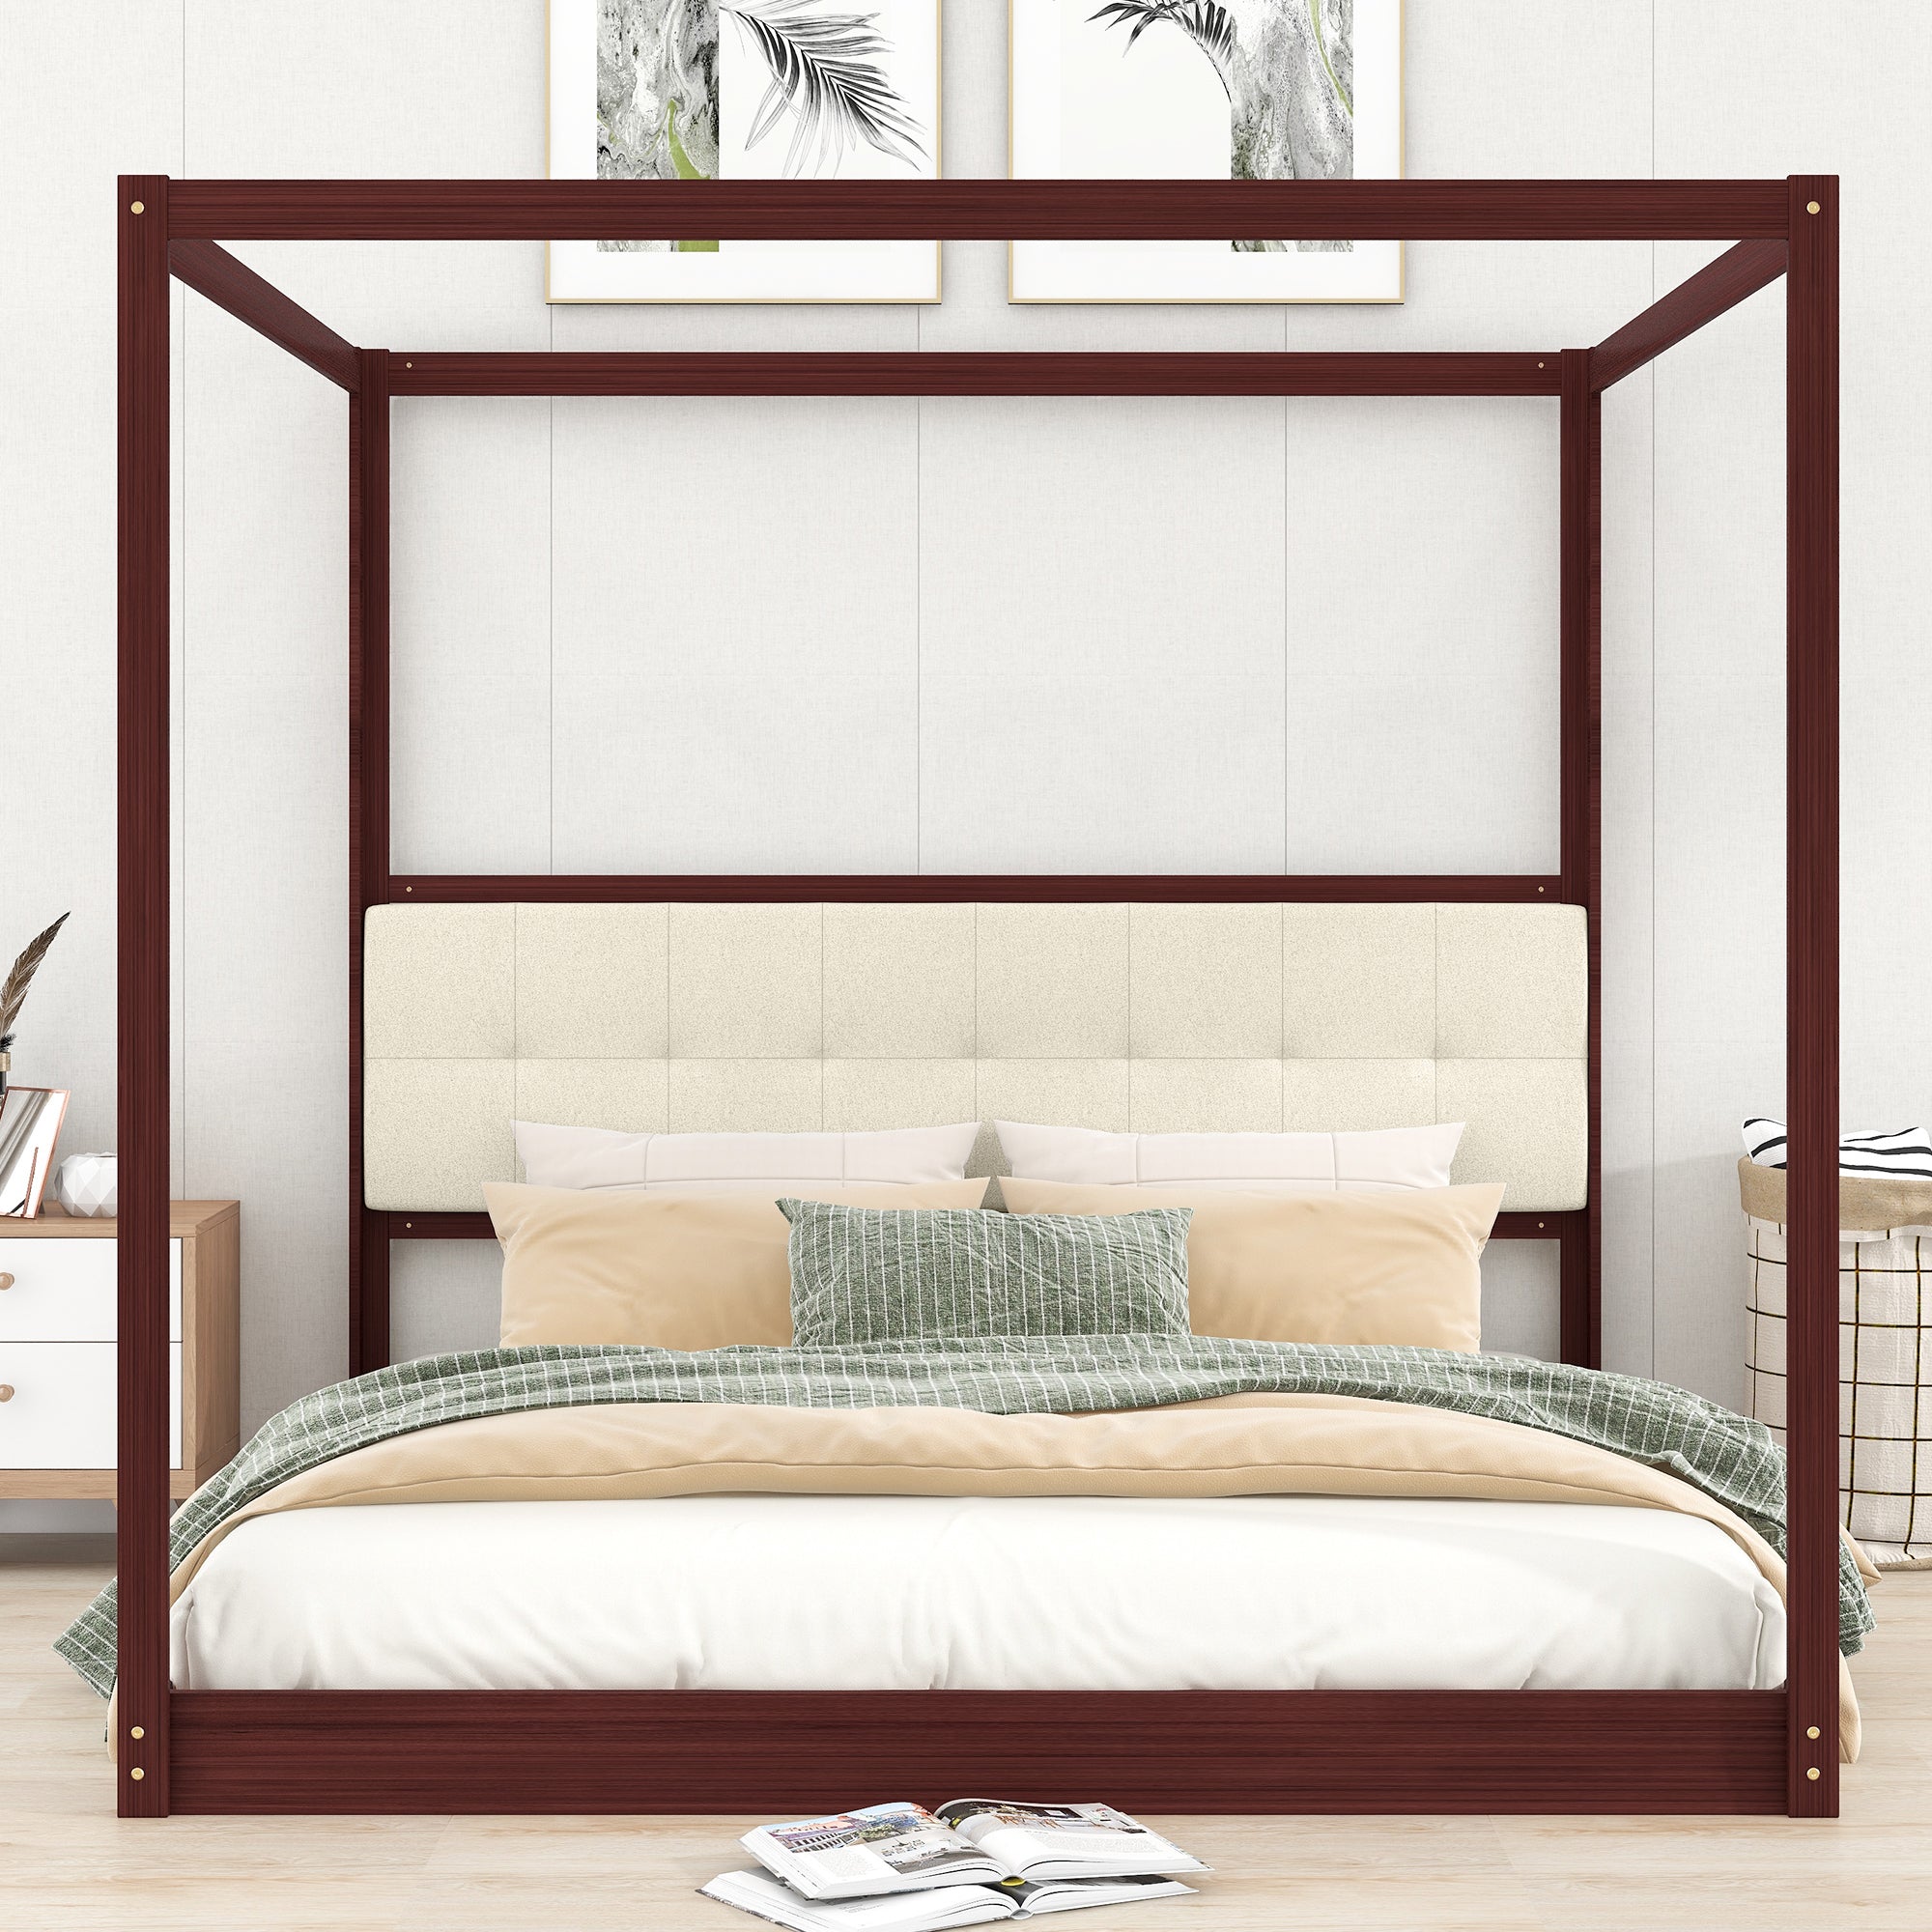 King Size Pine Wooden Canopy Bed Frame with Headboard By: Alabama Beds